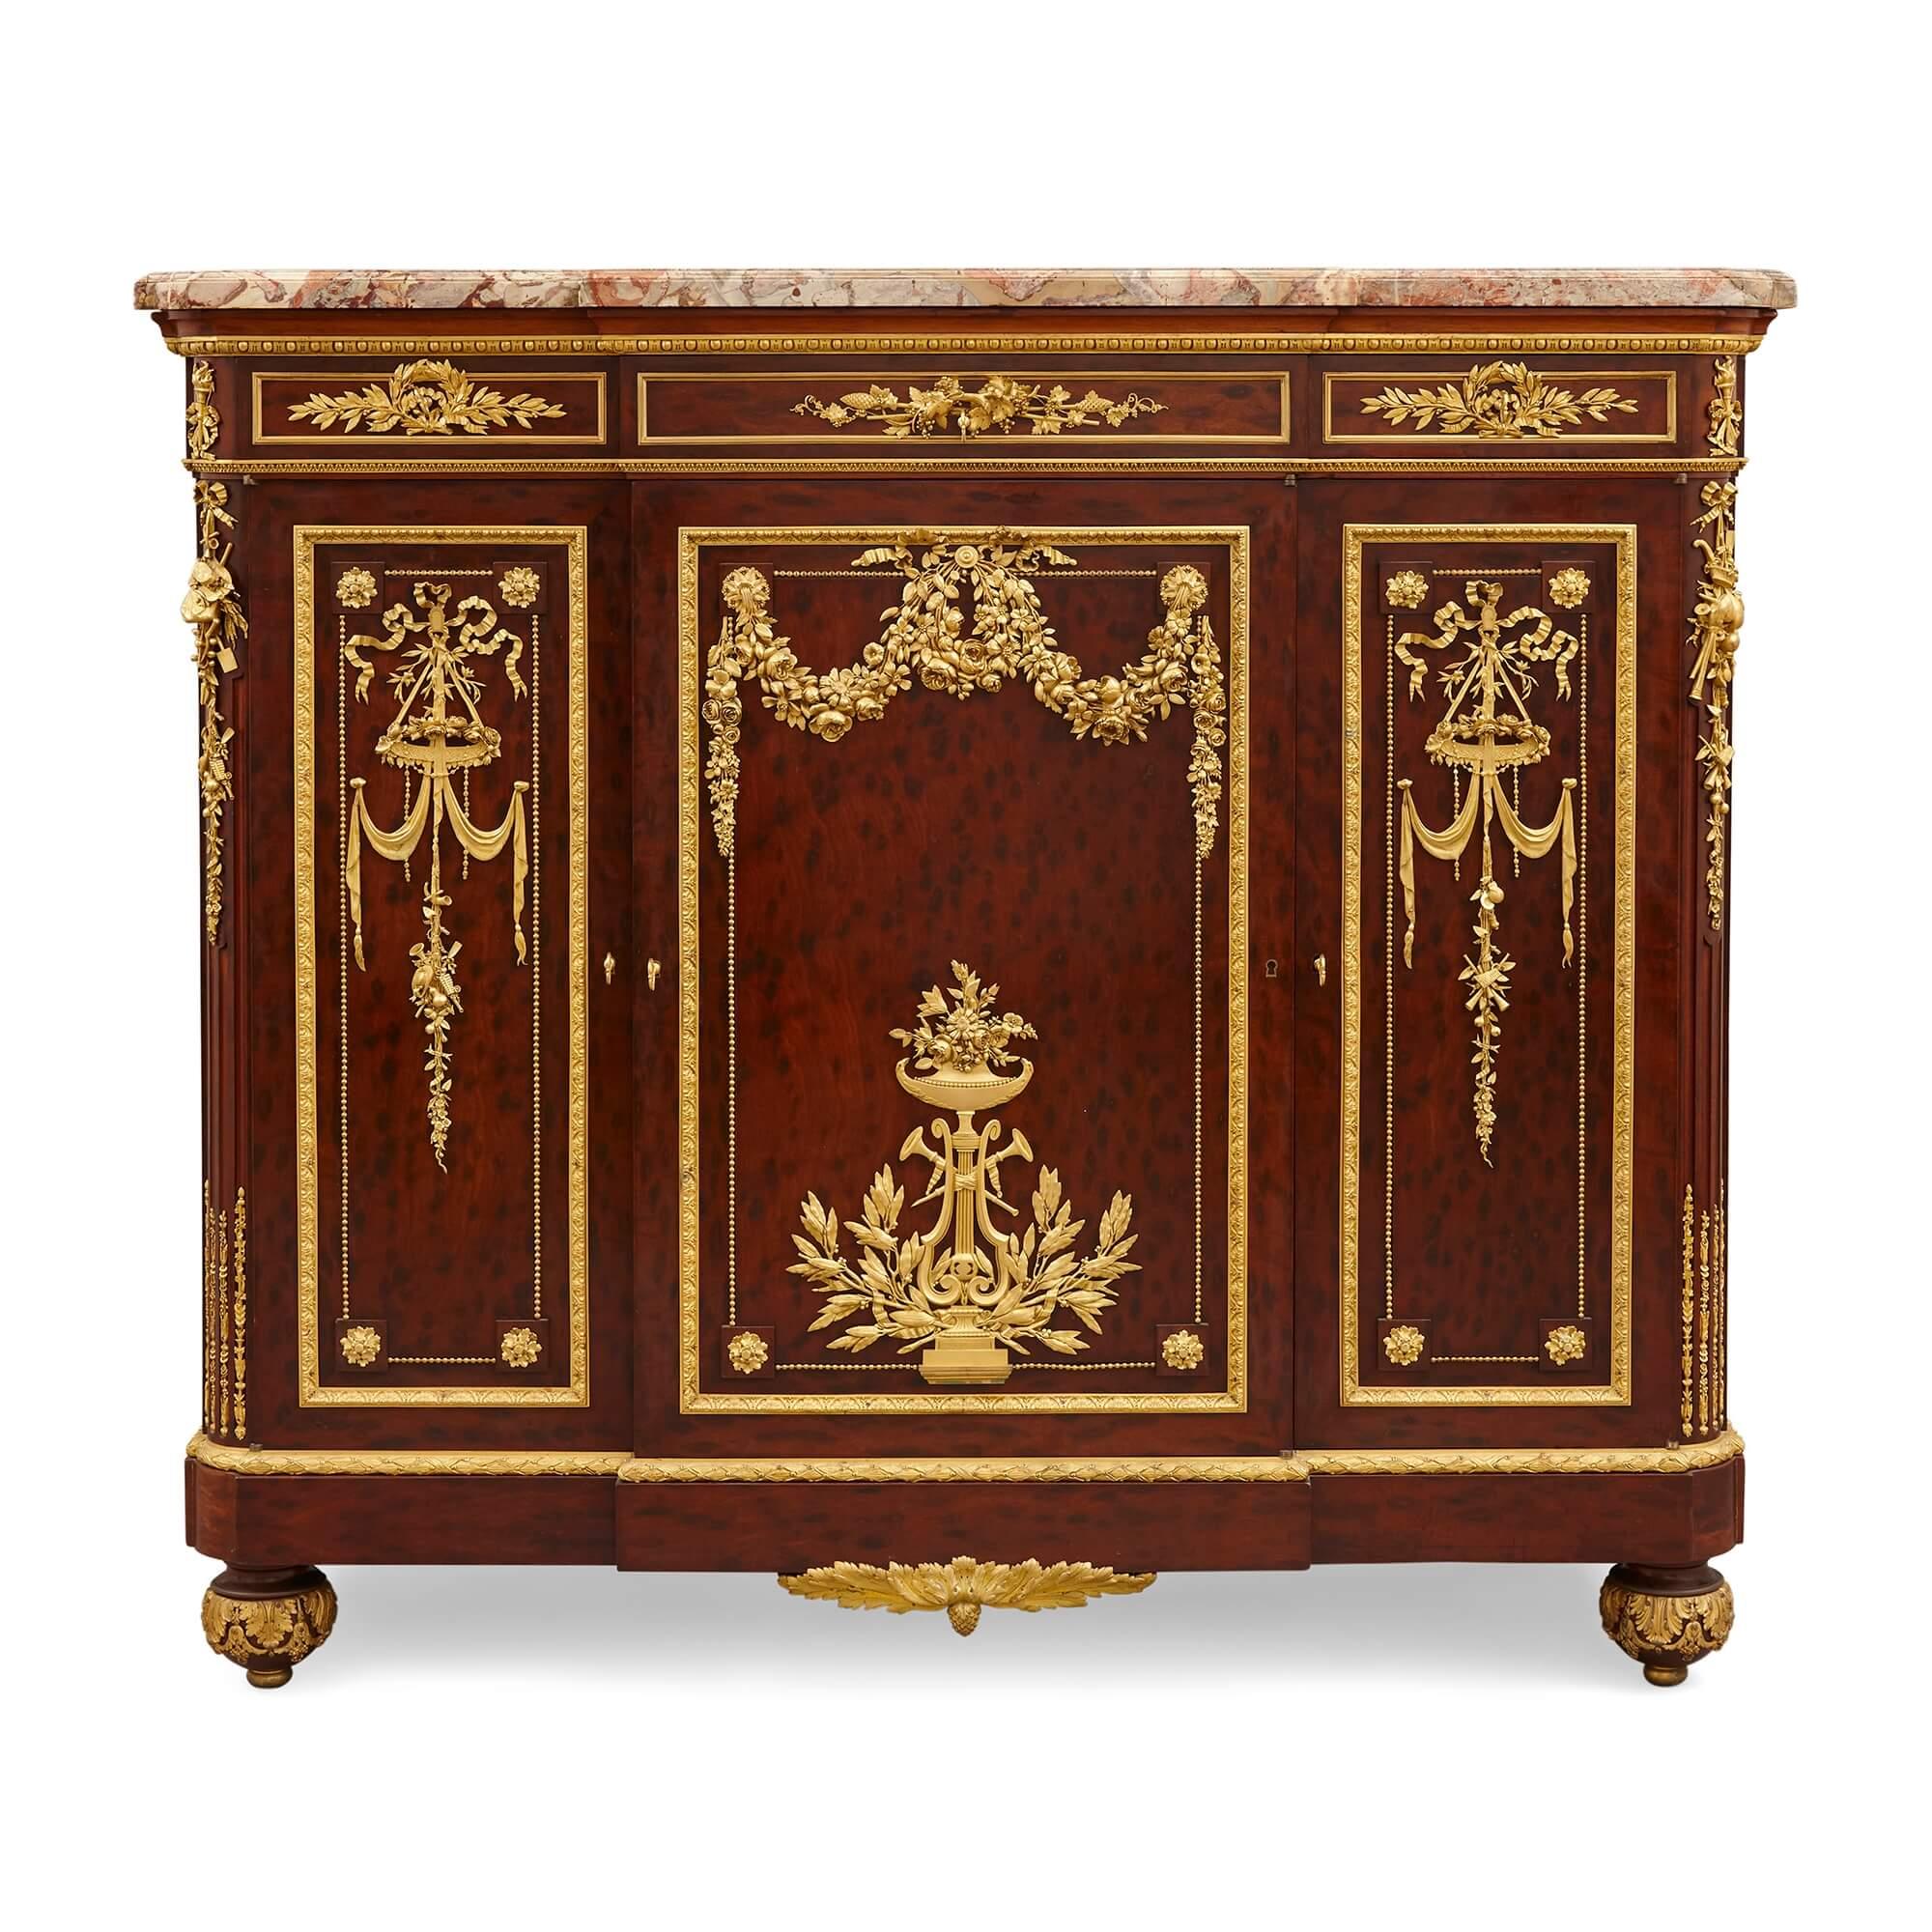 Antique French mahogany and ormolu cabinet by Grohé Frères
French, c. 1860
Height 112cm, width 124cm, depth 52cm 

The well-known firm of cabinetmakers, Grohé Frères crafted this superb cabinet in France around 1860. 

This furniture piece is topped